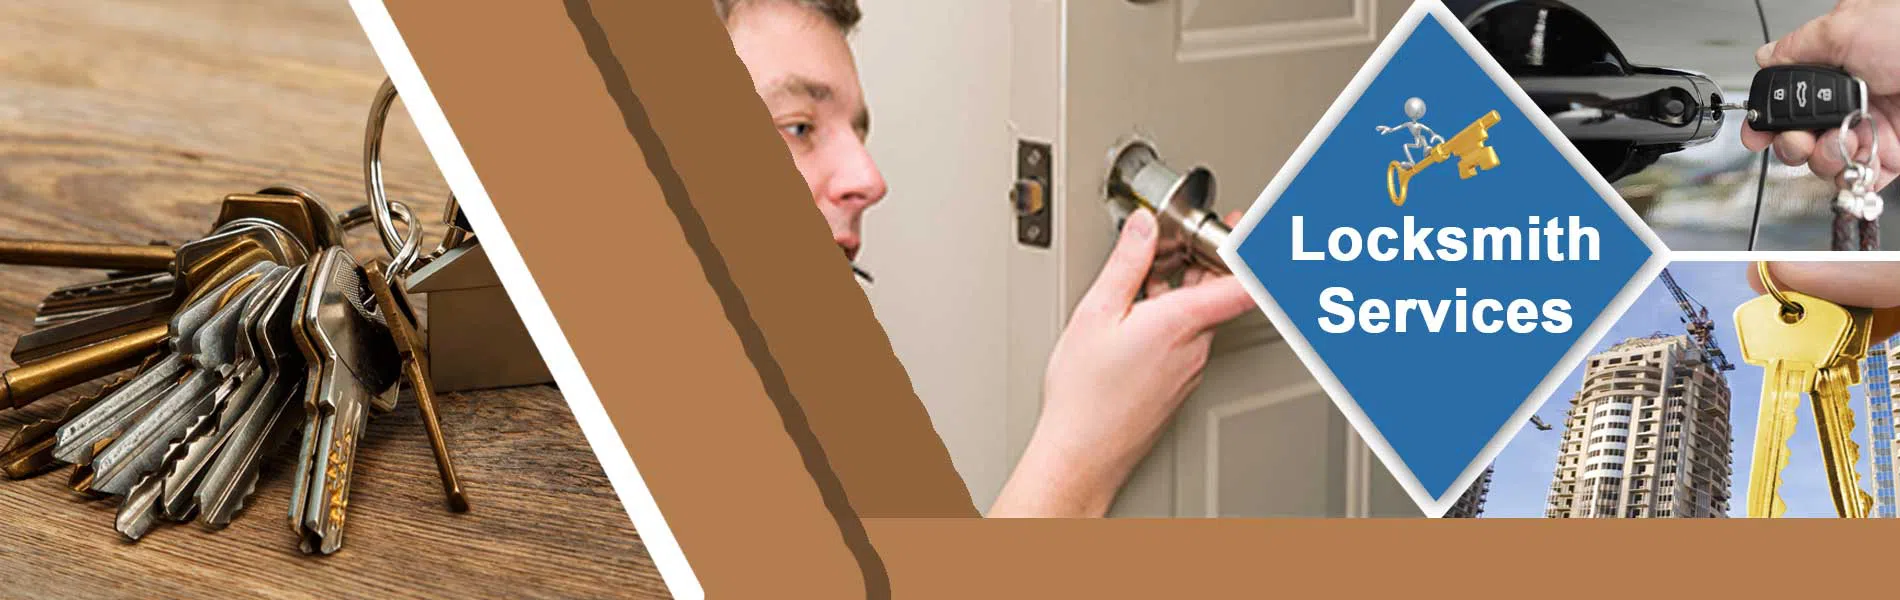 Residential Locksmith Services in Hollywood FL